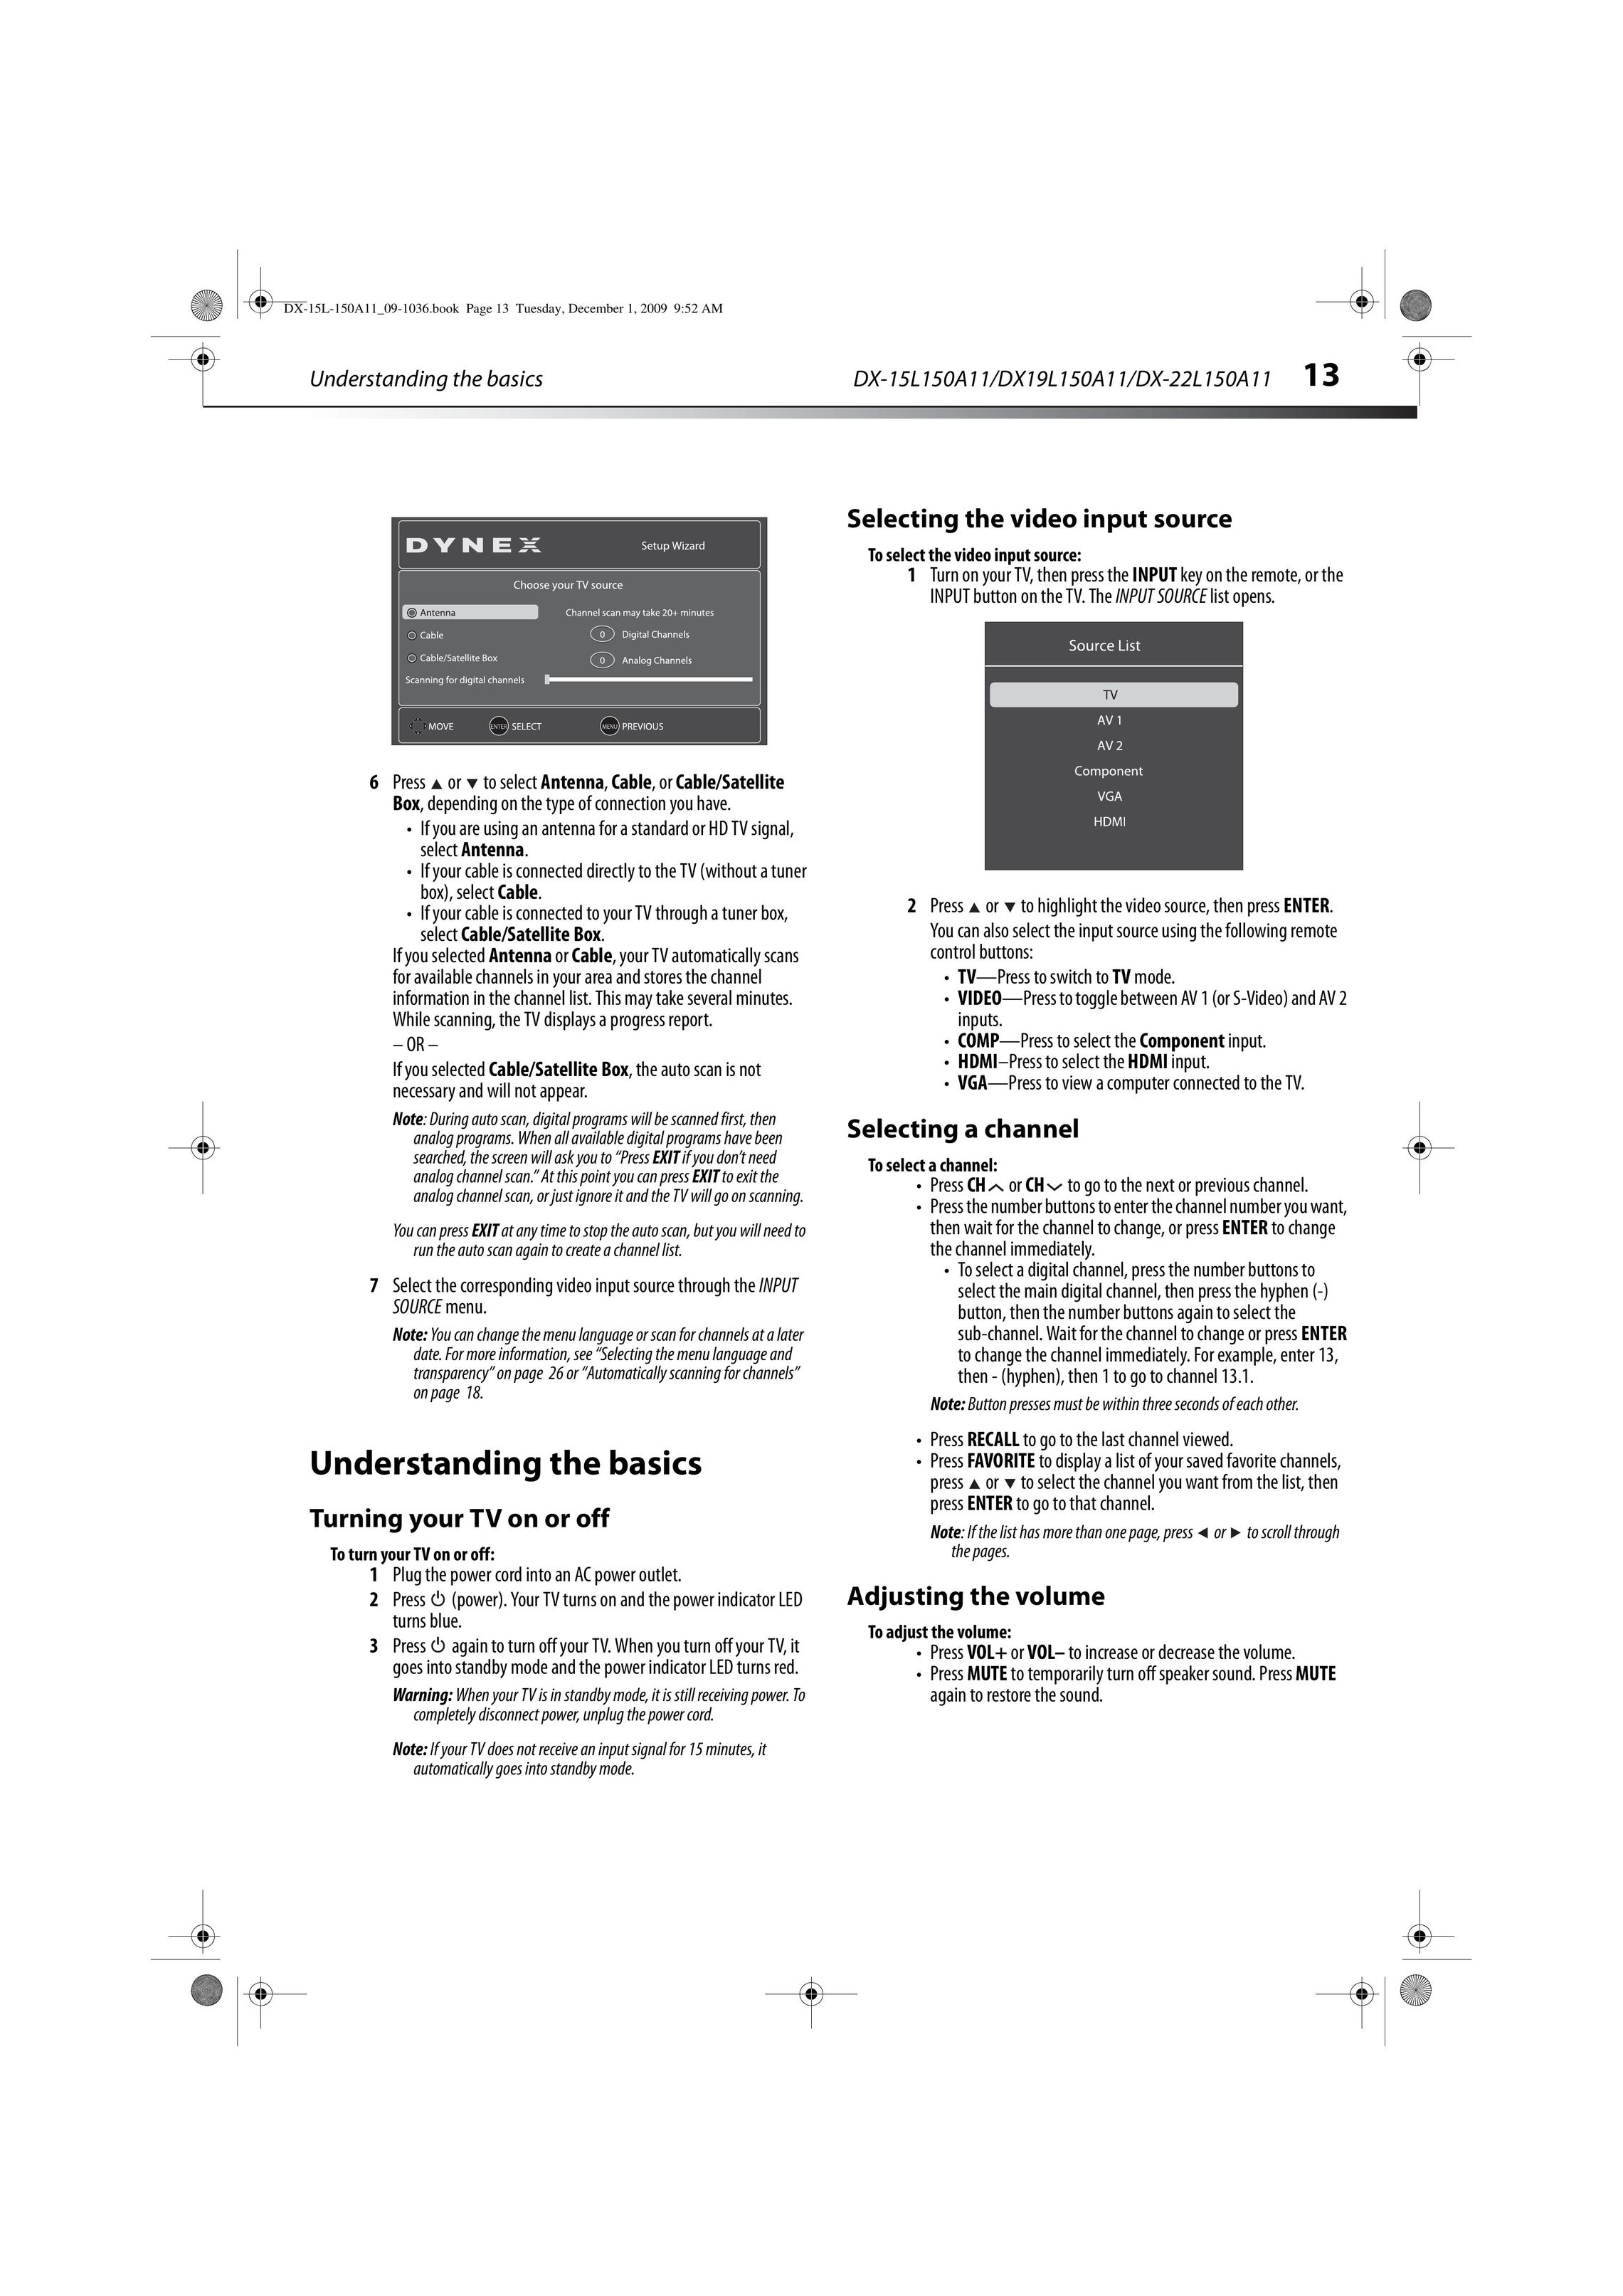 Dynex DX-22L150A11 Flat Panel Television User Manual (Page 16)